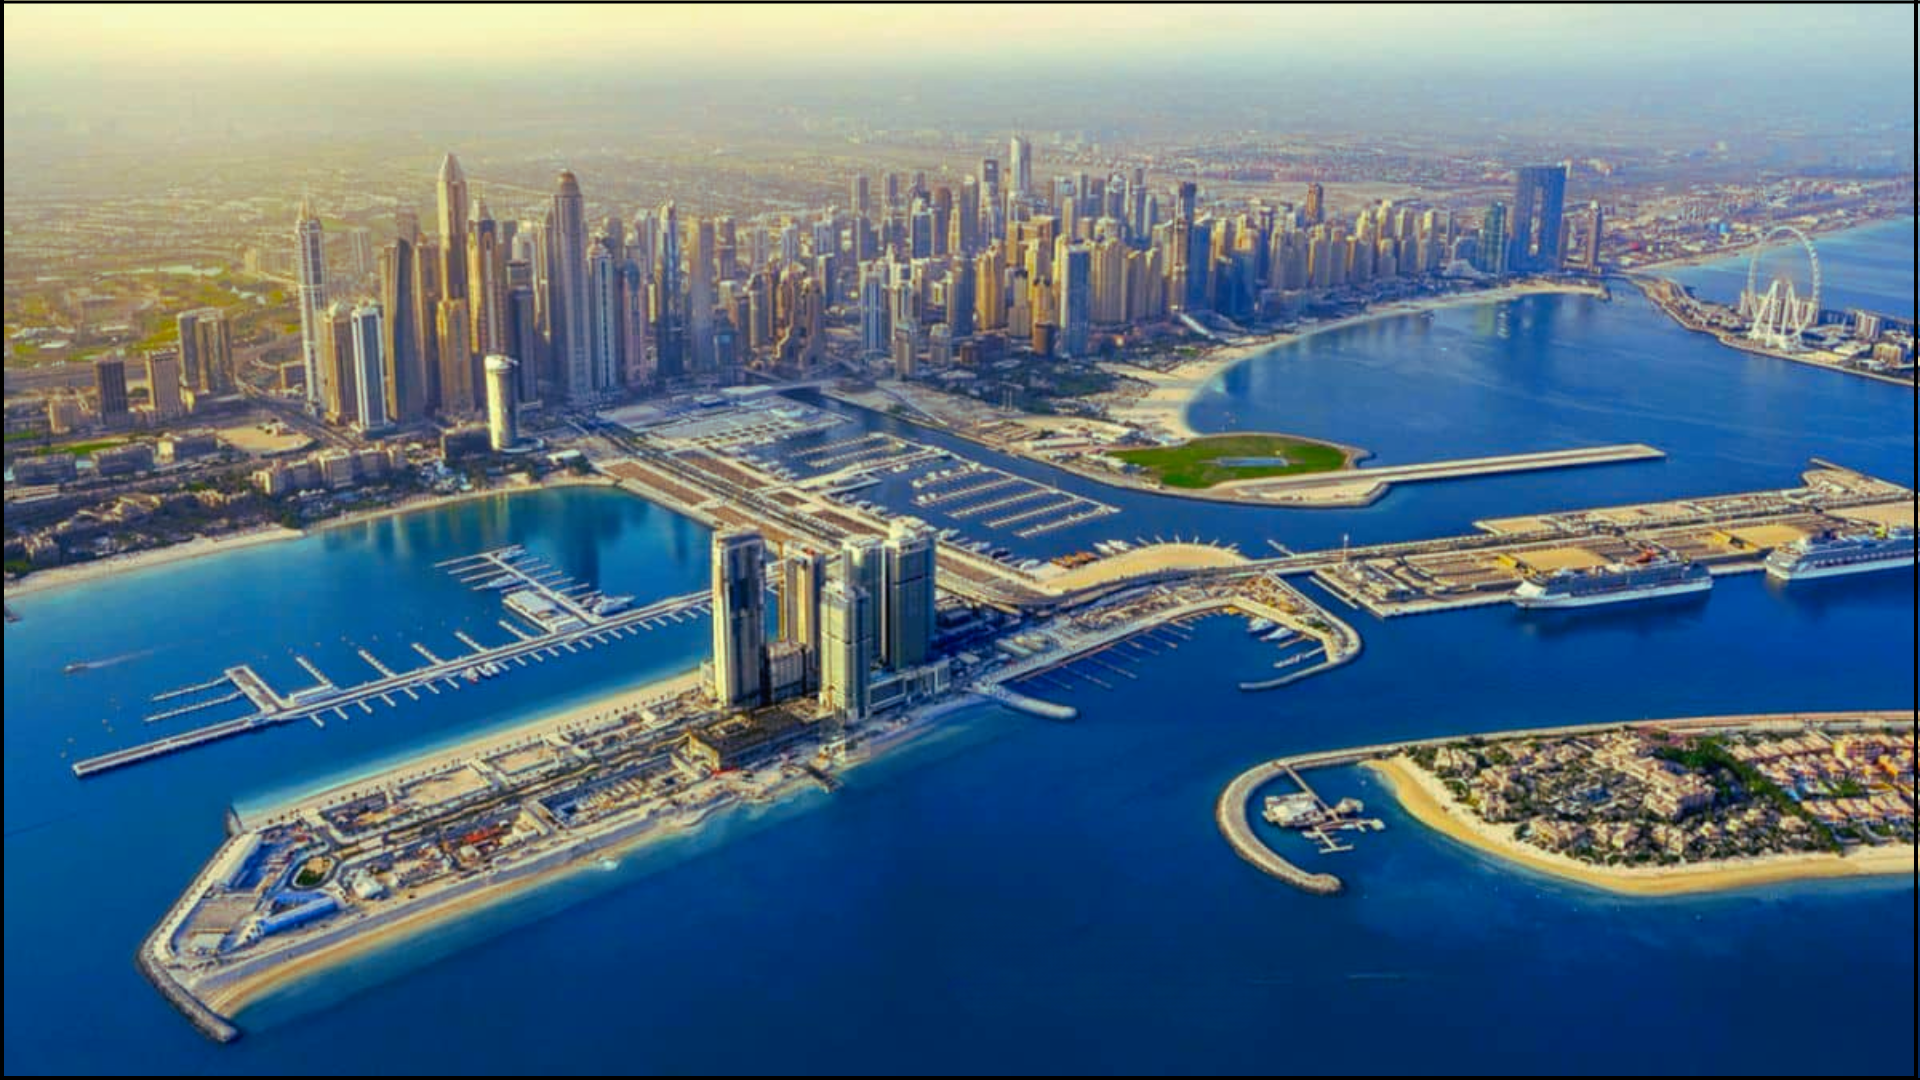 New Bridge to Revolutionize Connectivity Between Sheikh Zayed Road and Dubai Harbour